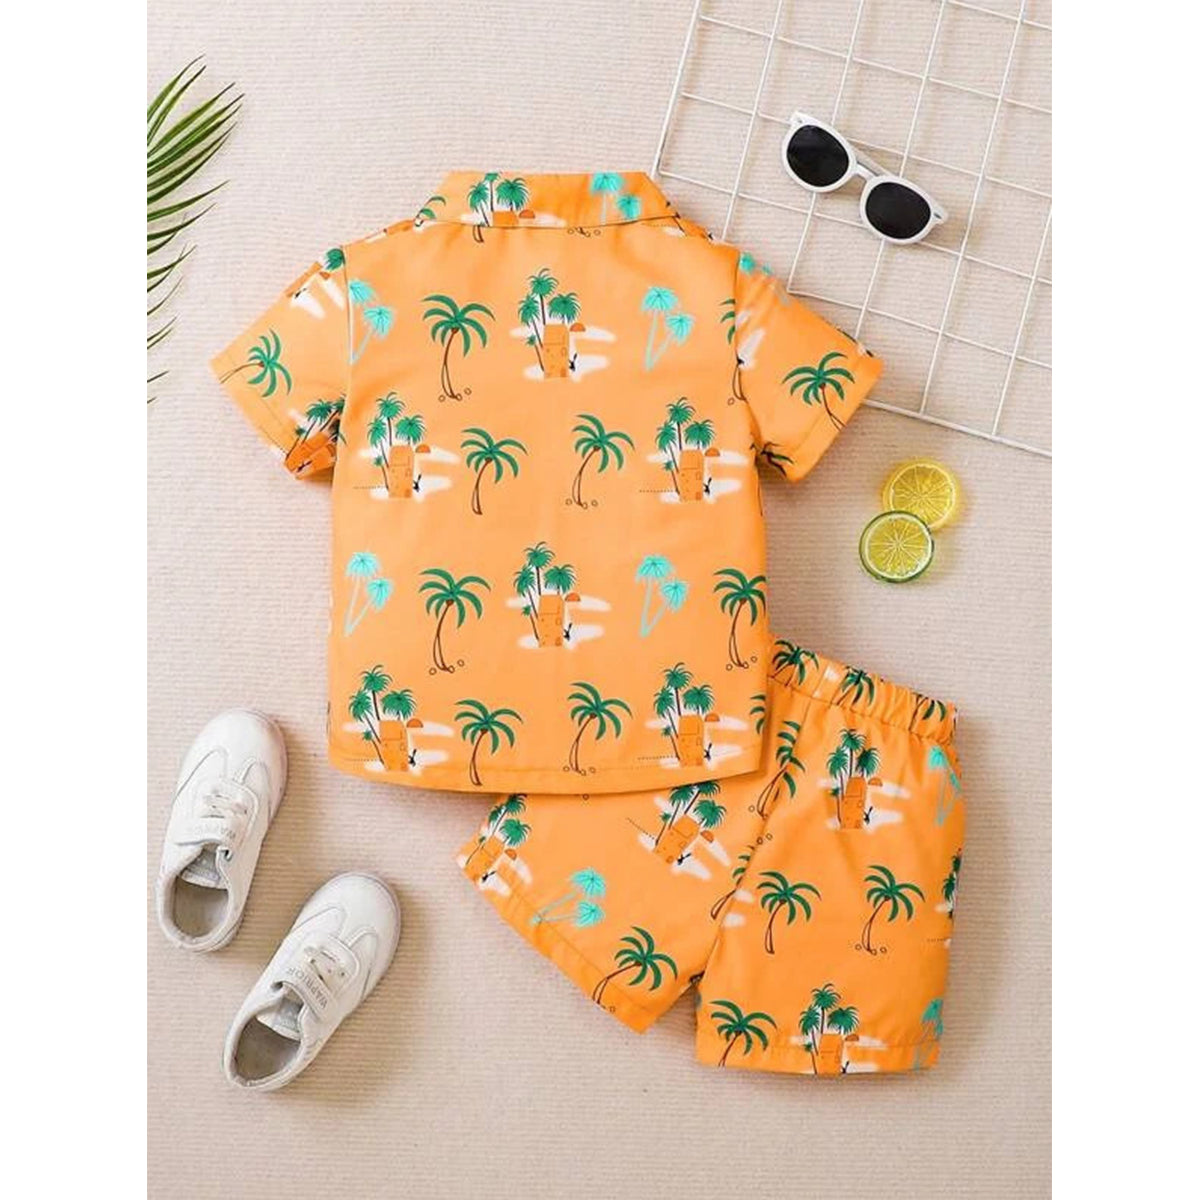 Venutaloza Baby Set Animals & Tropical Coconut (Combo Pack Of 2) Shirt & Shorts Without tee Two Piece Set For Boy & Girls..